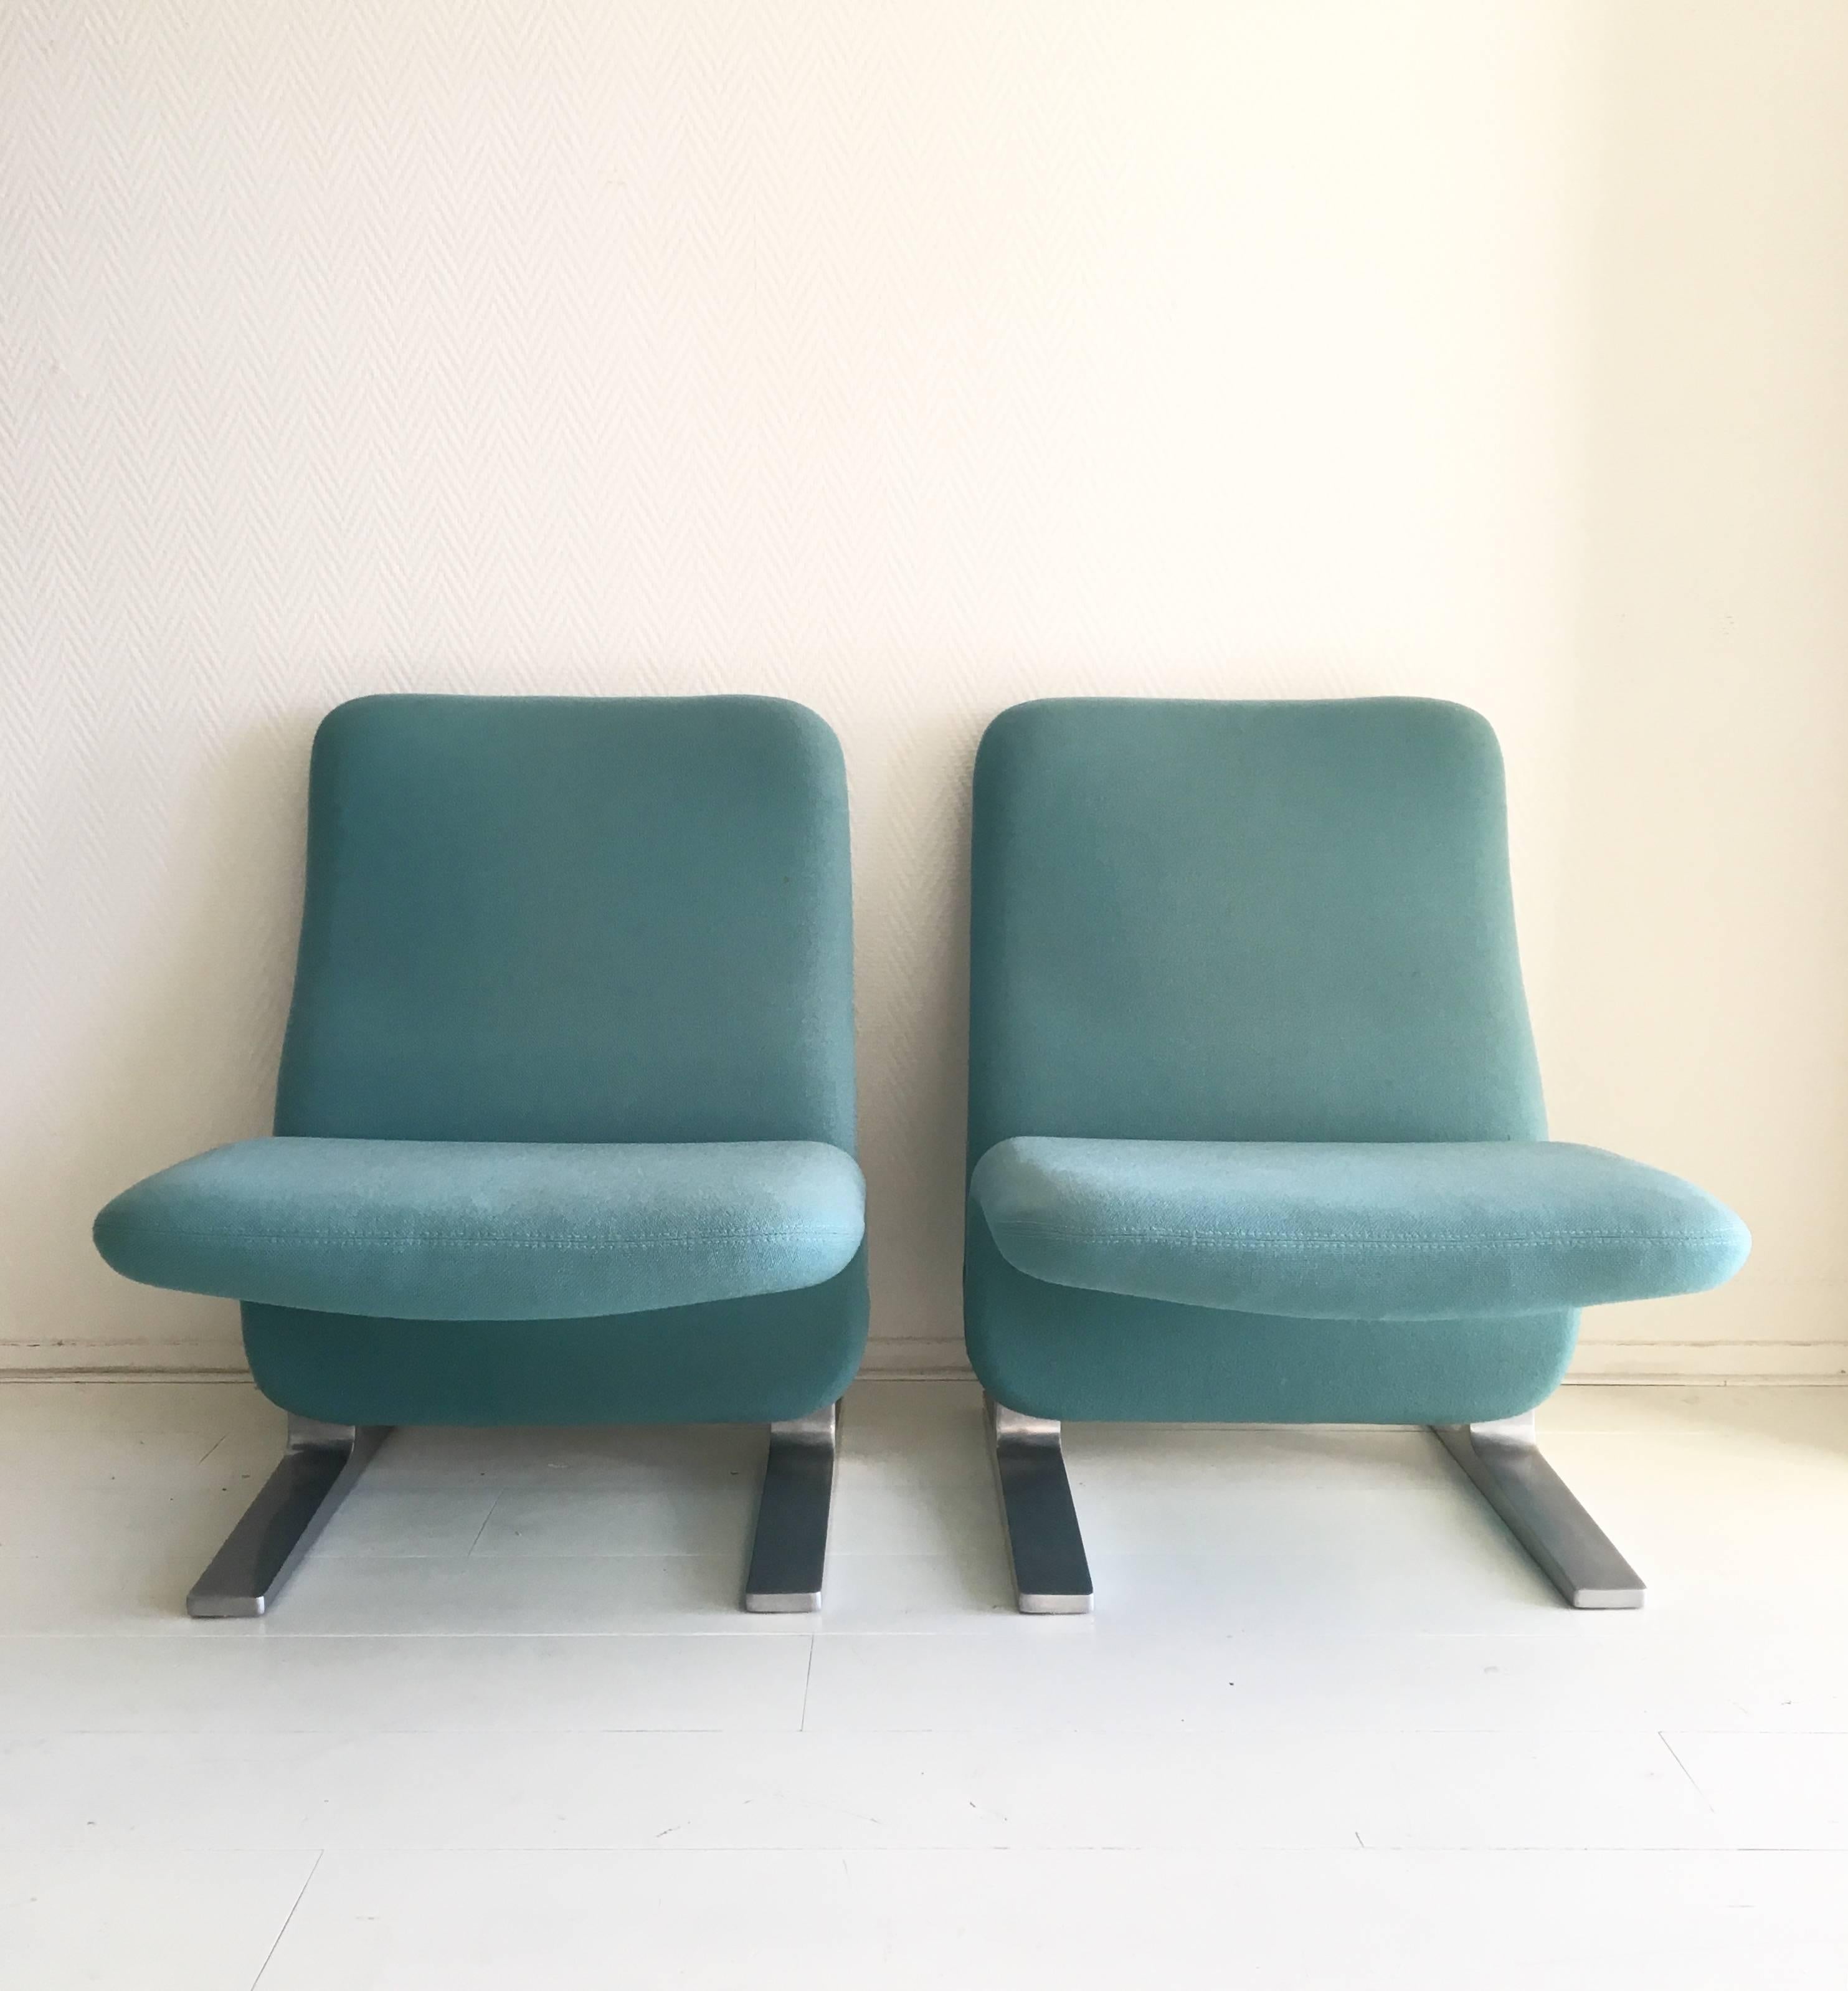 Iconic Artifort Concorde is a lounge chair without armrests. It was originally designed by Pierre Paulin for the airport waiting space of the French plane 'Concorde'. The chairs were named after this plane.
These aqua colored chairs feature